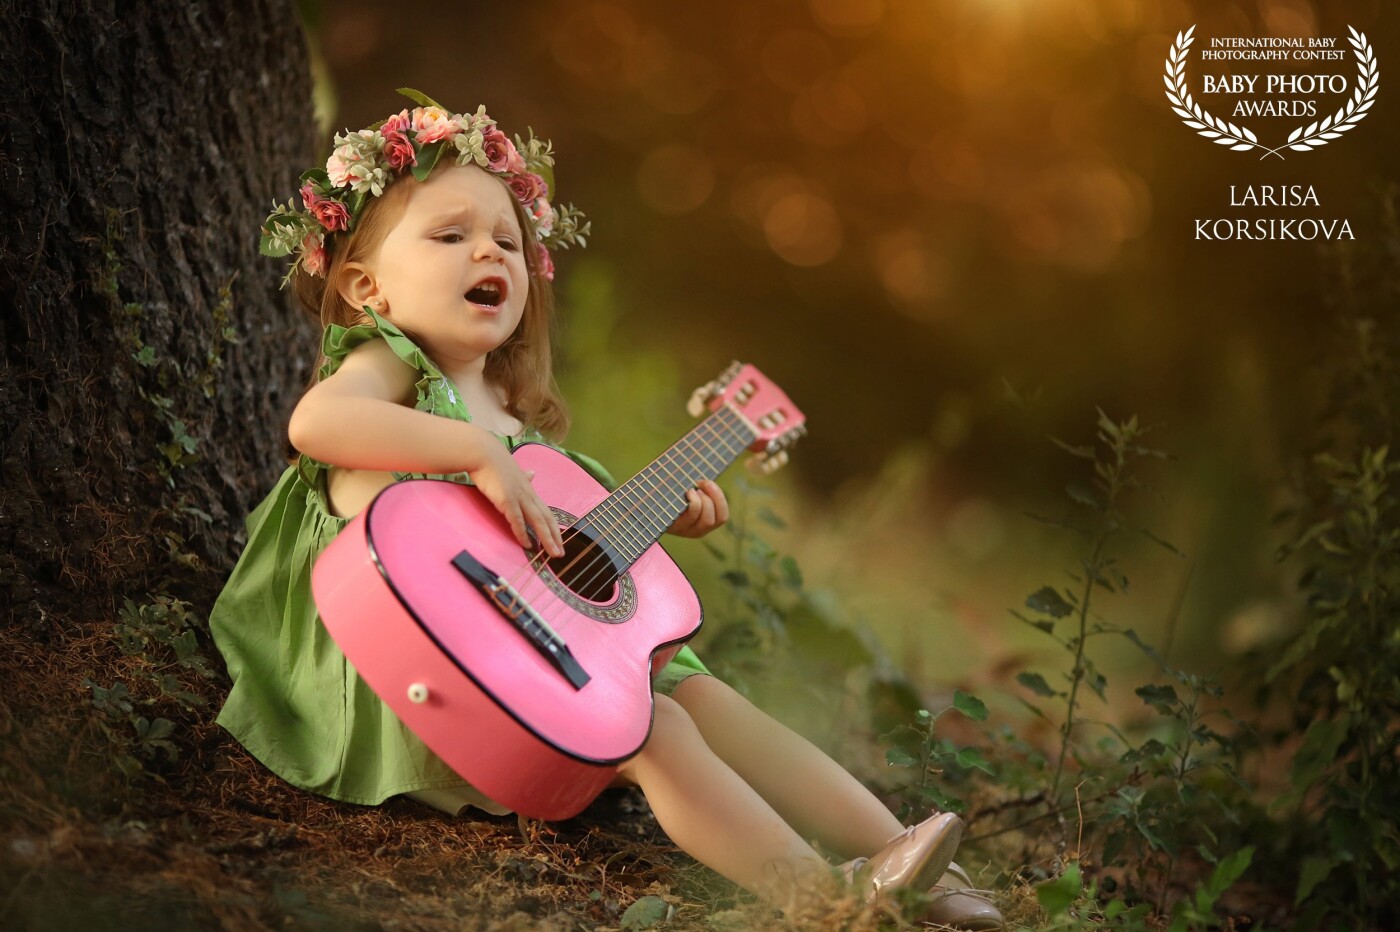 My daughter Aurora is just 3 years old  and loves to sing. We were preparing the shoot and she just took the guitar and started to sing her original song: "Have to see me again, have to see me again!" :). That was sooo funny. We wanted to memorize it. 